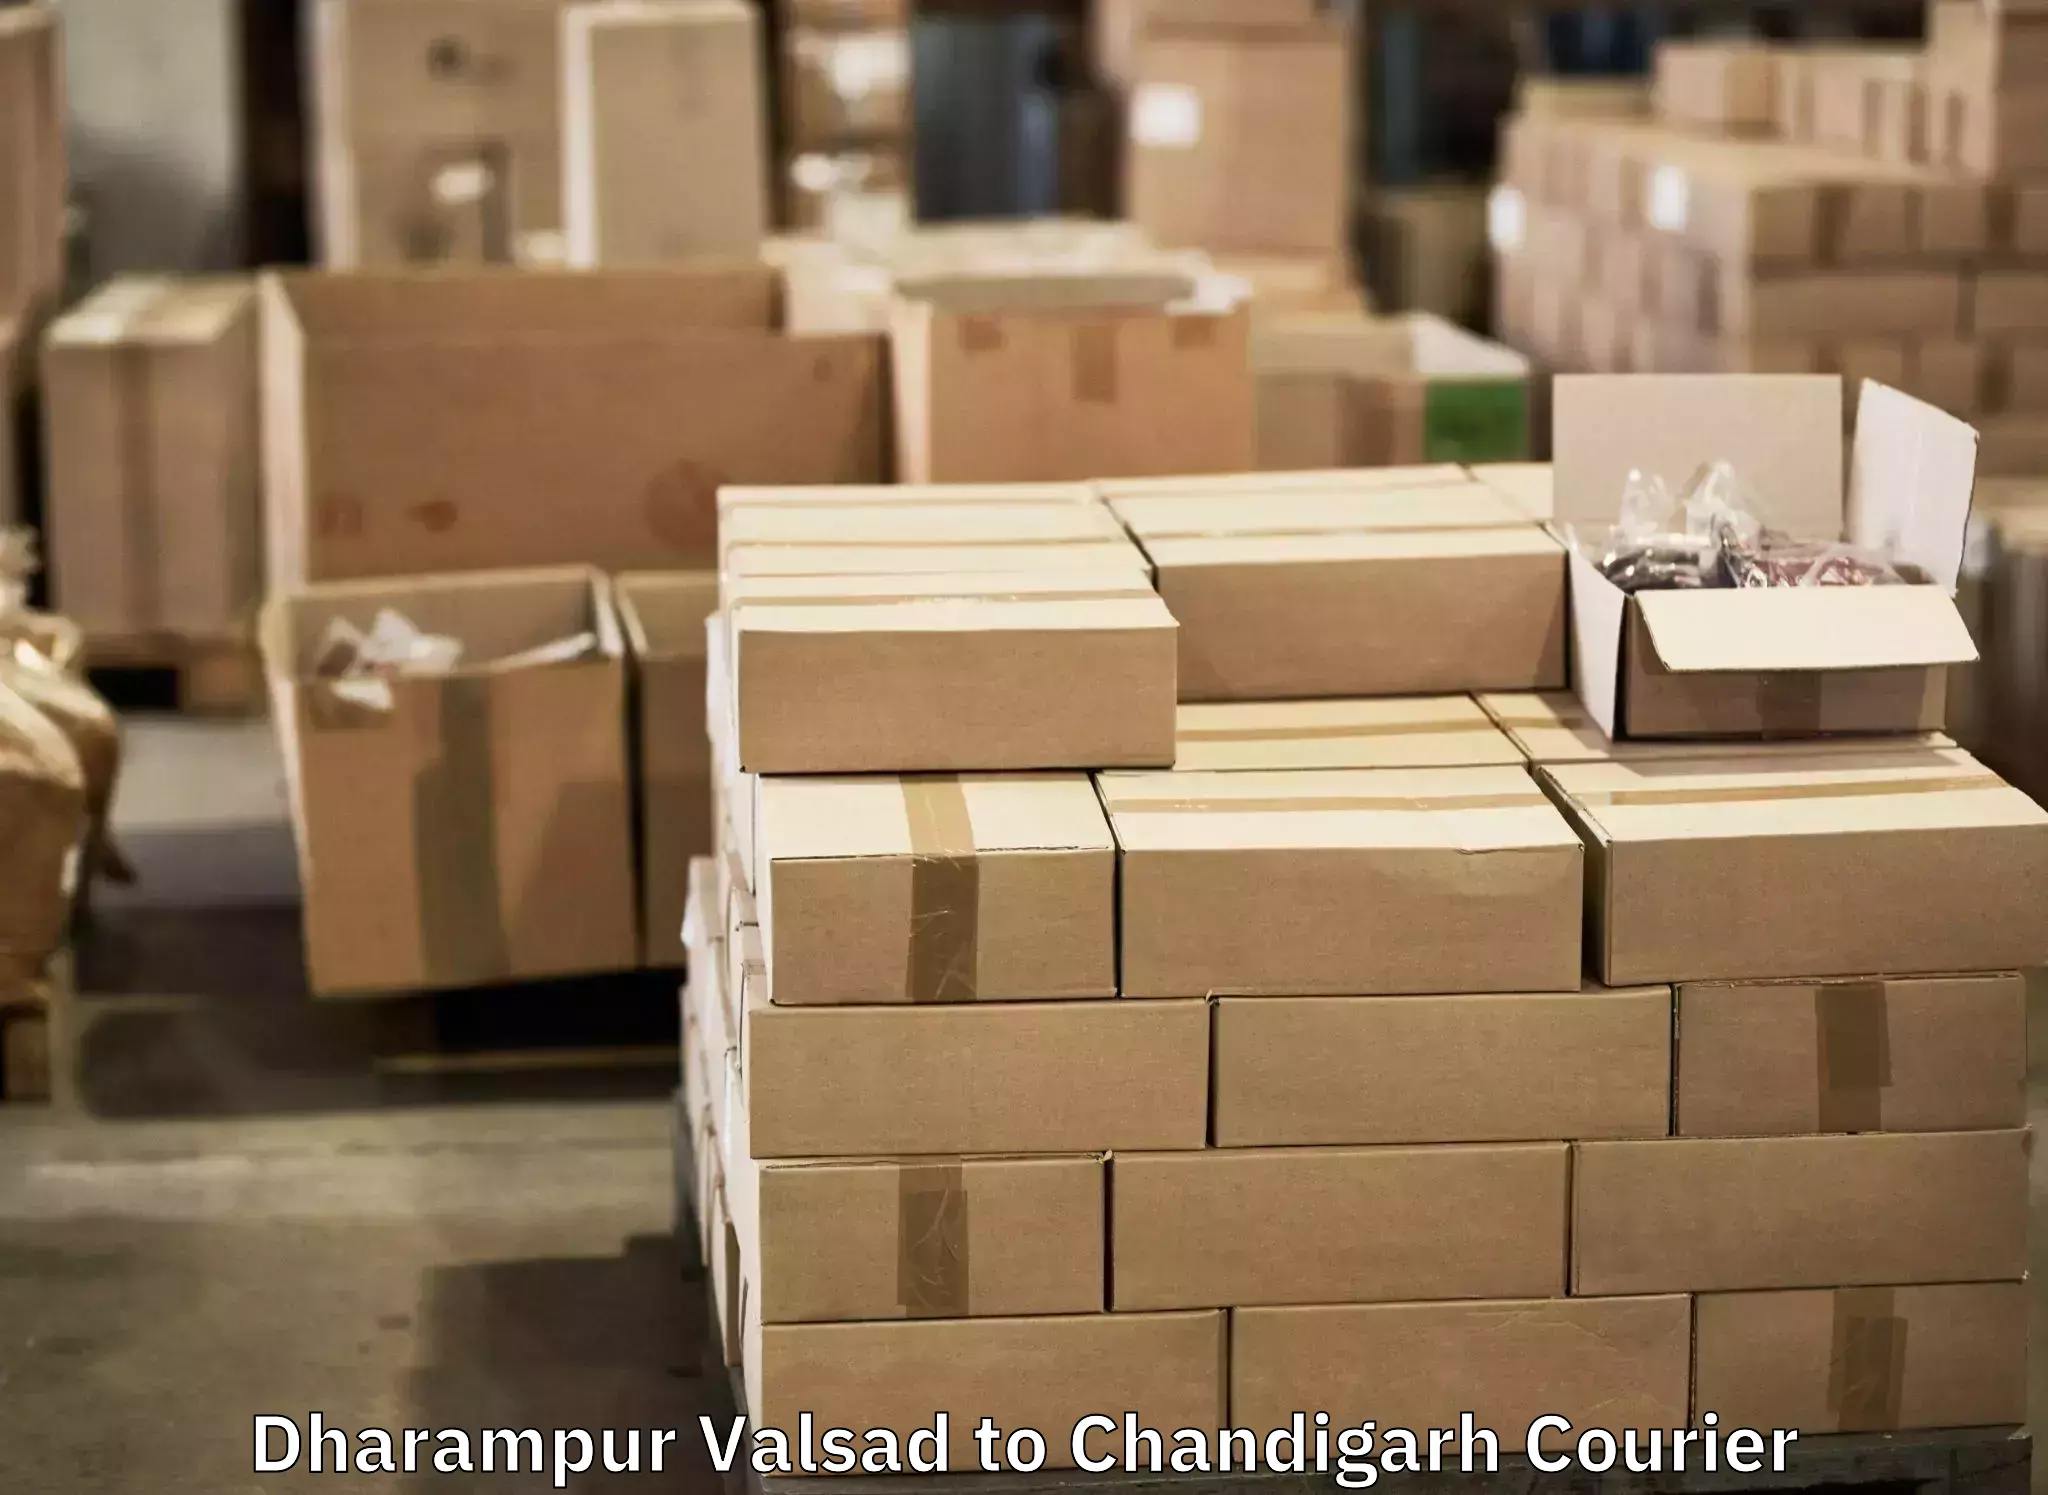 Luggage delivery network Dharampur Valsad to Chandigarh